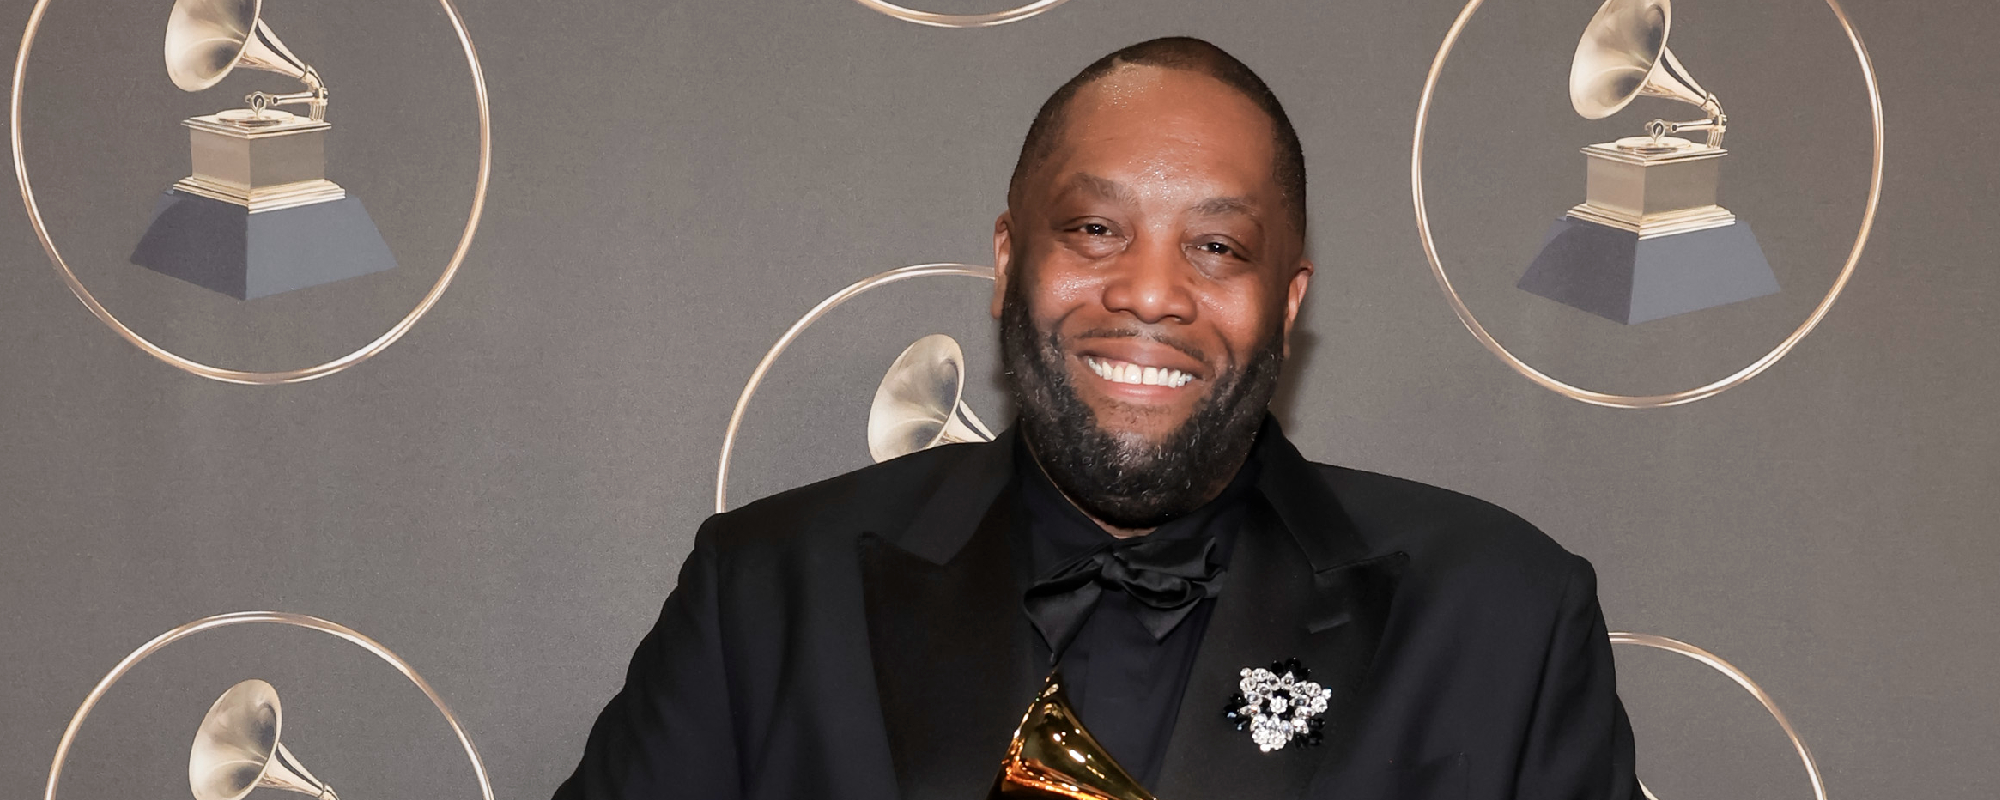 Rapper Killer Mike Escorted Out of GRAMMYs in Handcuffs After Winning 3 Awards